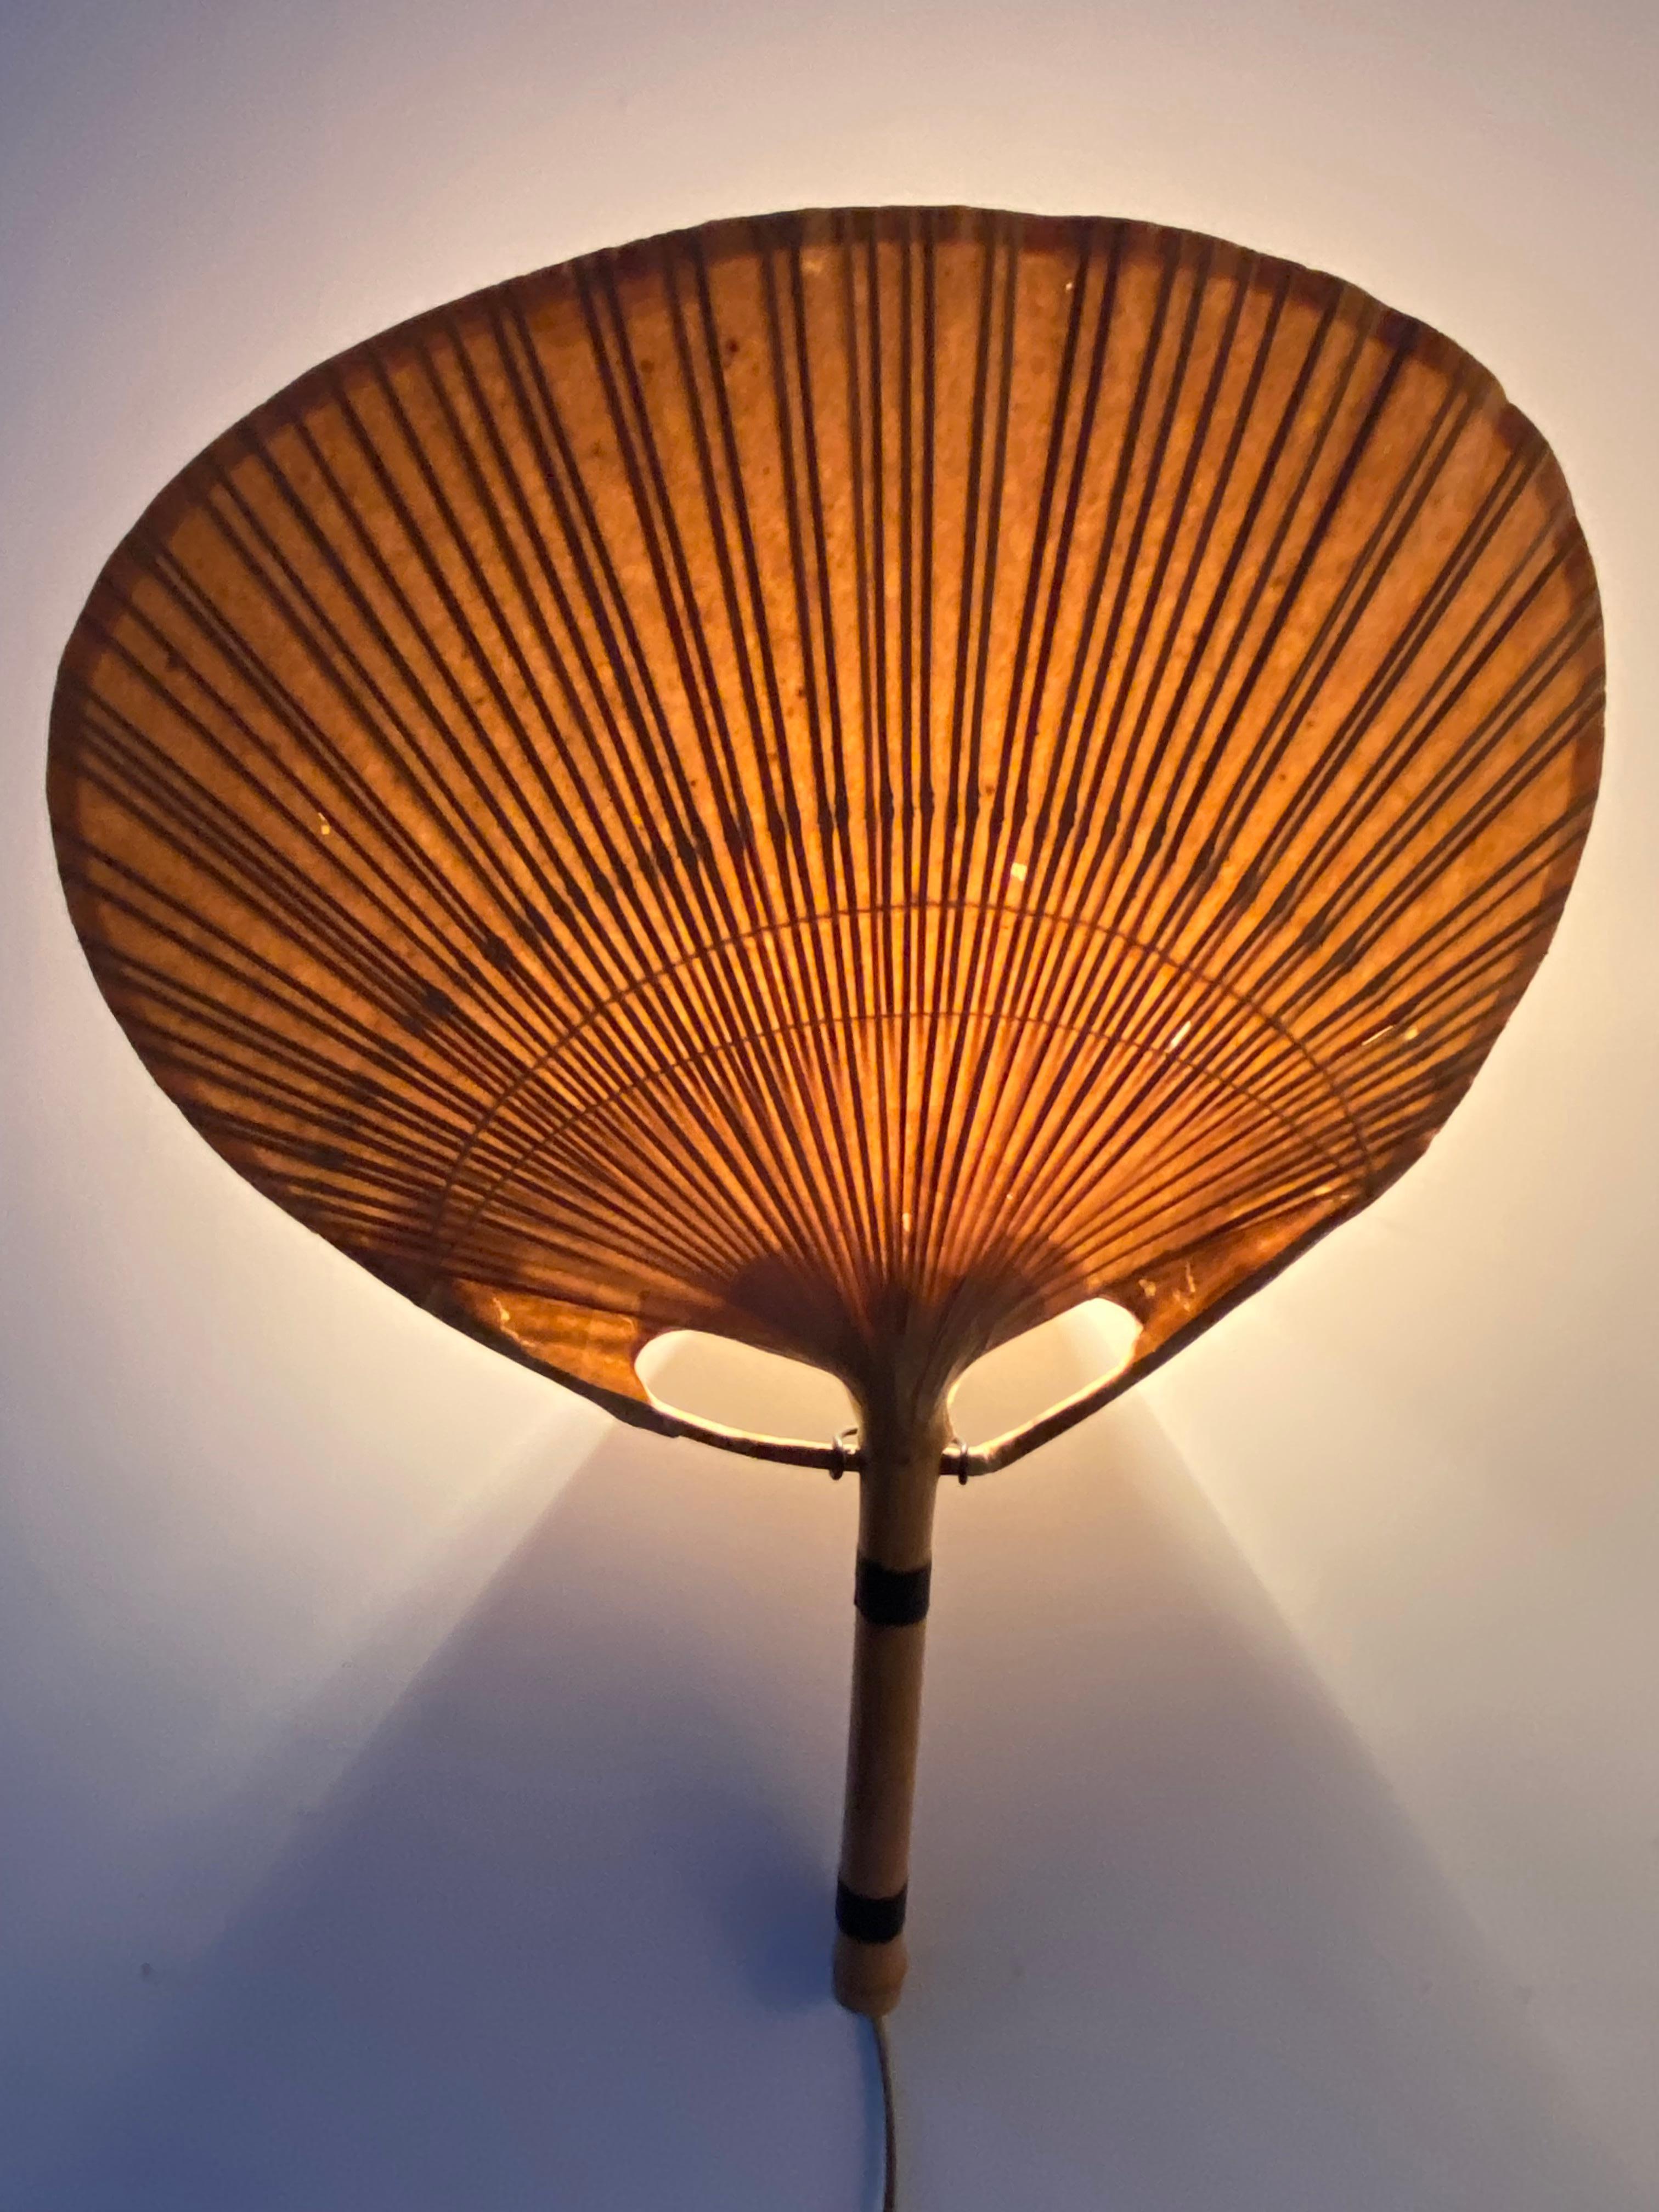 Very Rare Pair of Uchiwa II wall appliques by Ingo Maurer for M-design Munich Germany 1973

The Uchiwa II is the smallest version of the Uchiwa series and gives a very impressive diffuse light when lit. This stunning light was comprised of bamboo